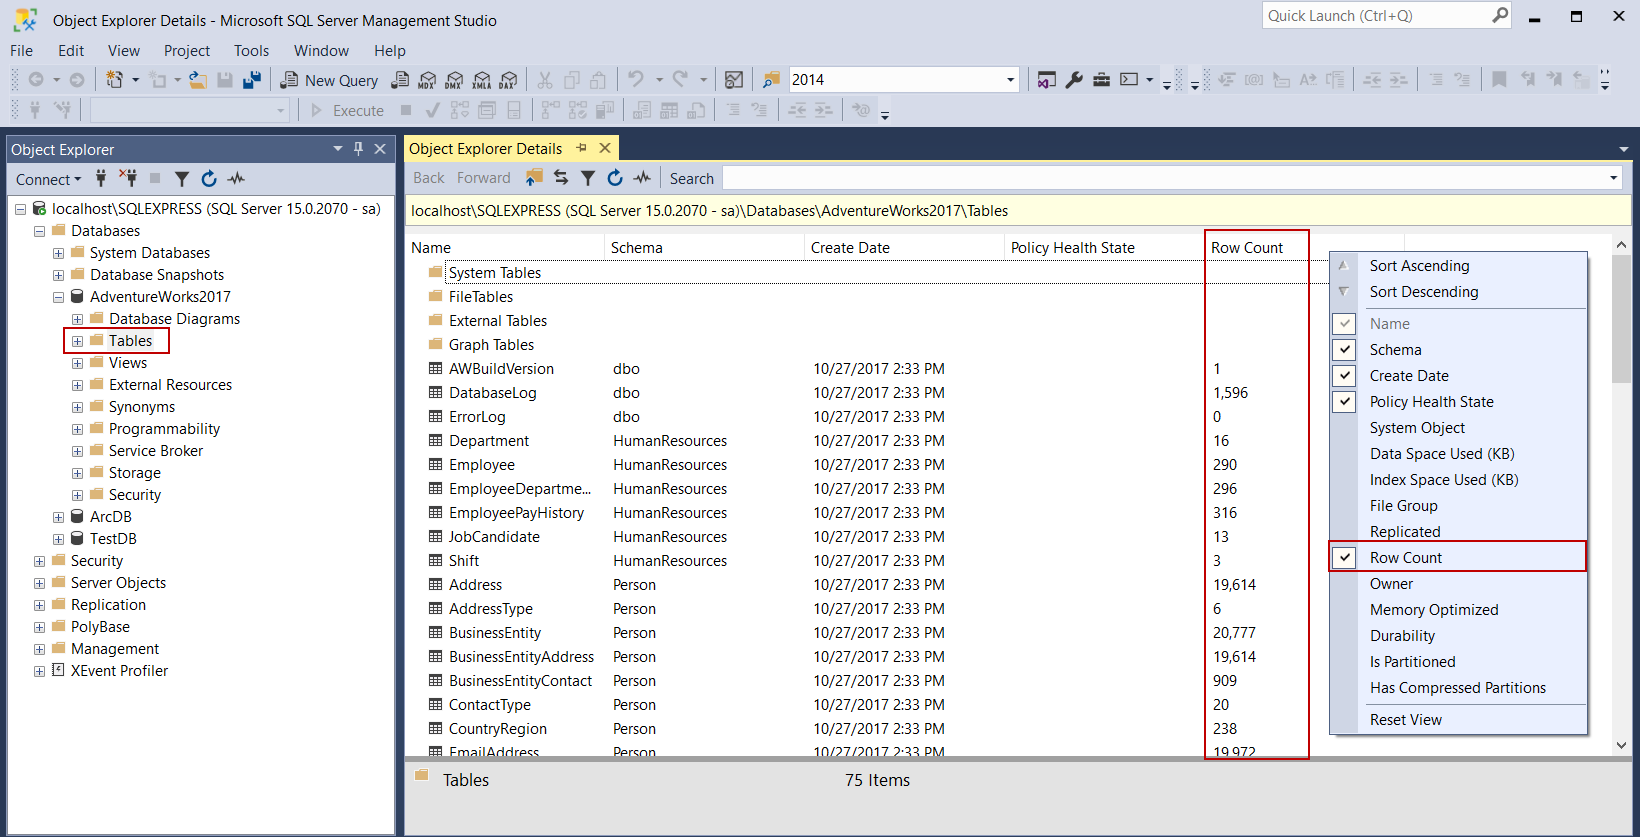 Showing tables row count in the Object Explorer Details